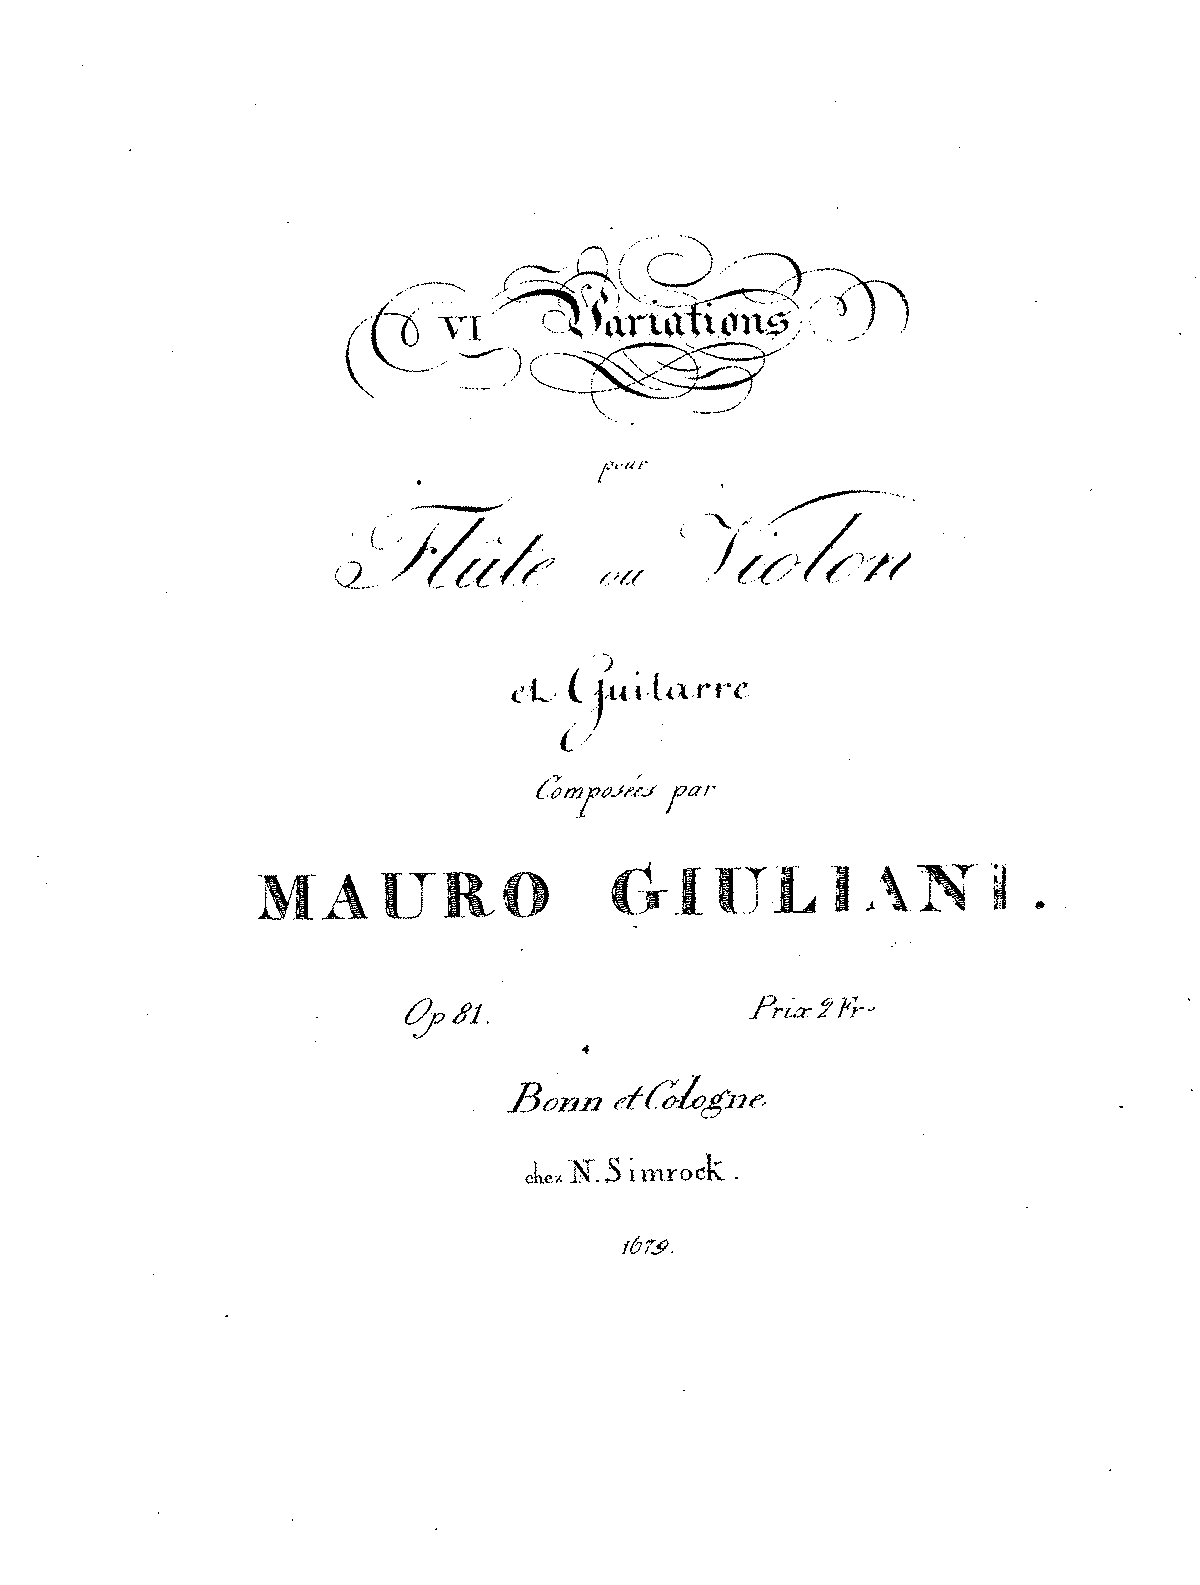 6 Variations for Flute and Guitar, Op.81 (Giuliani, Mauro) - IMSLP